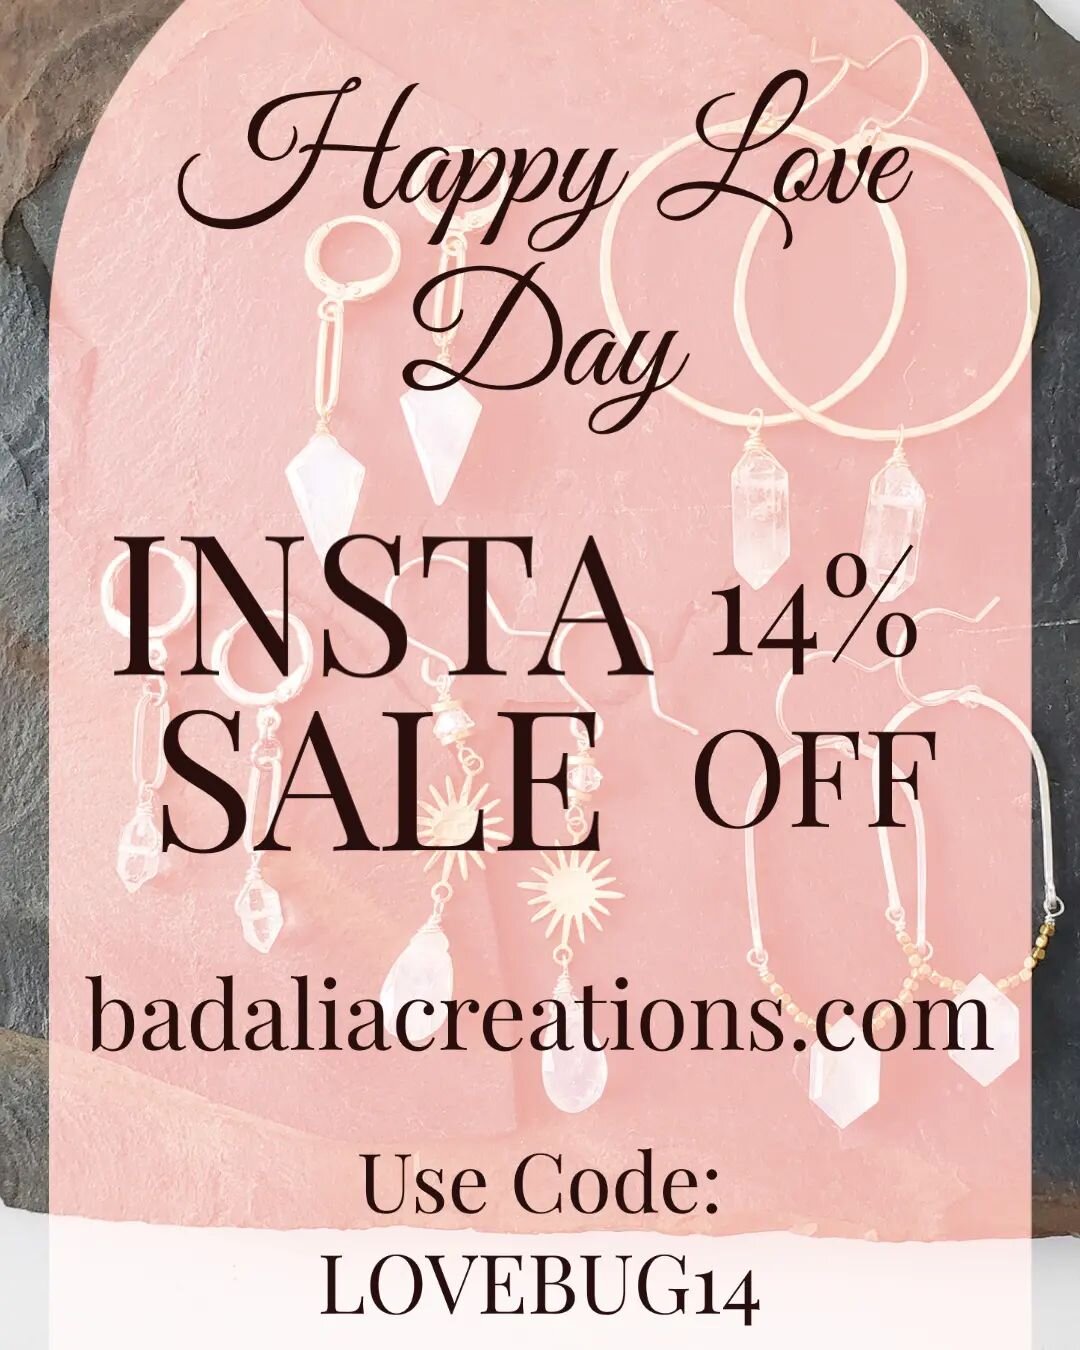 I believe we should celebrate love everyday, not just when the calander says so 😉 BUT, enjoy 14% badaliacreations.com and spread some love to your main squeeze, galentine, mum, soul sister or maybe even yourself! ❤